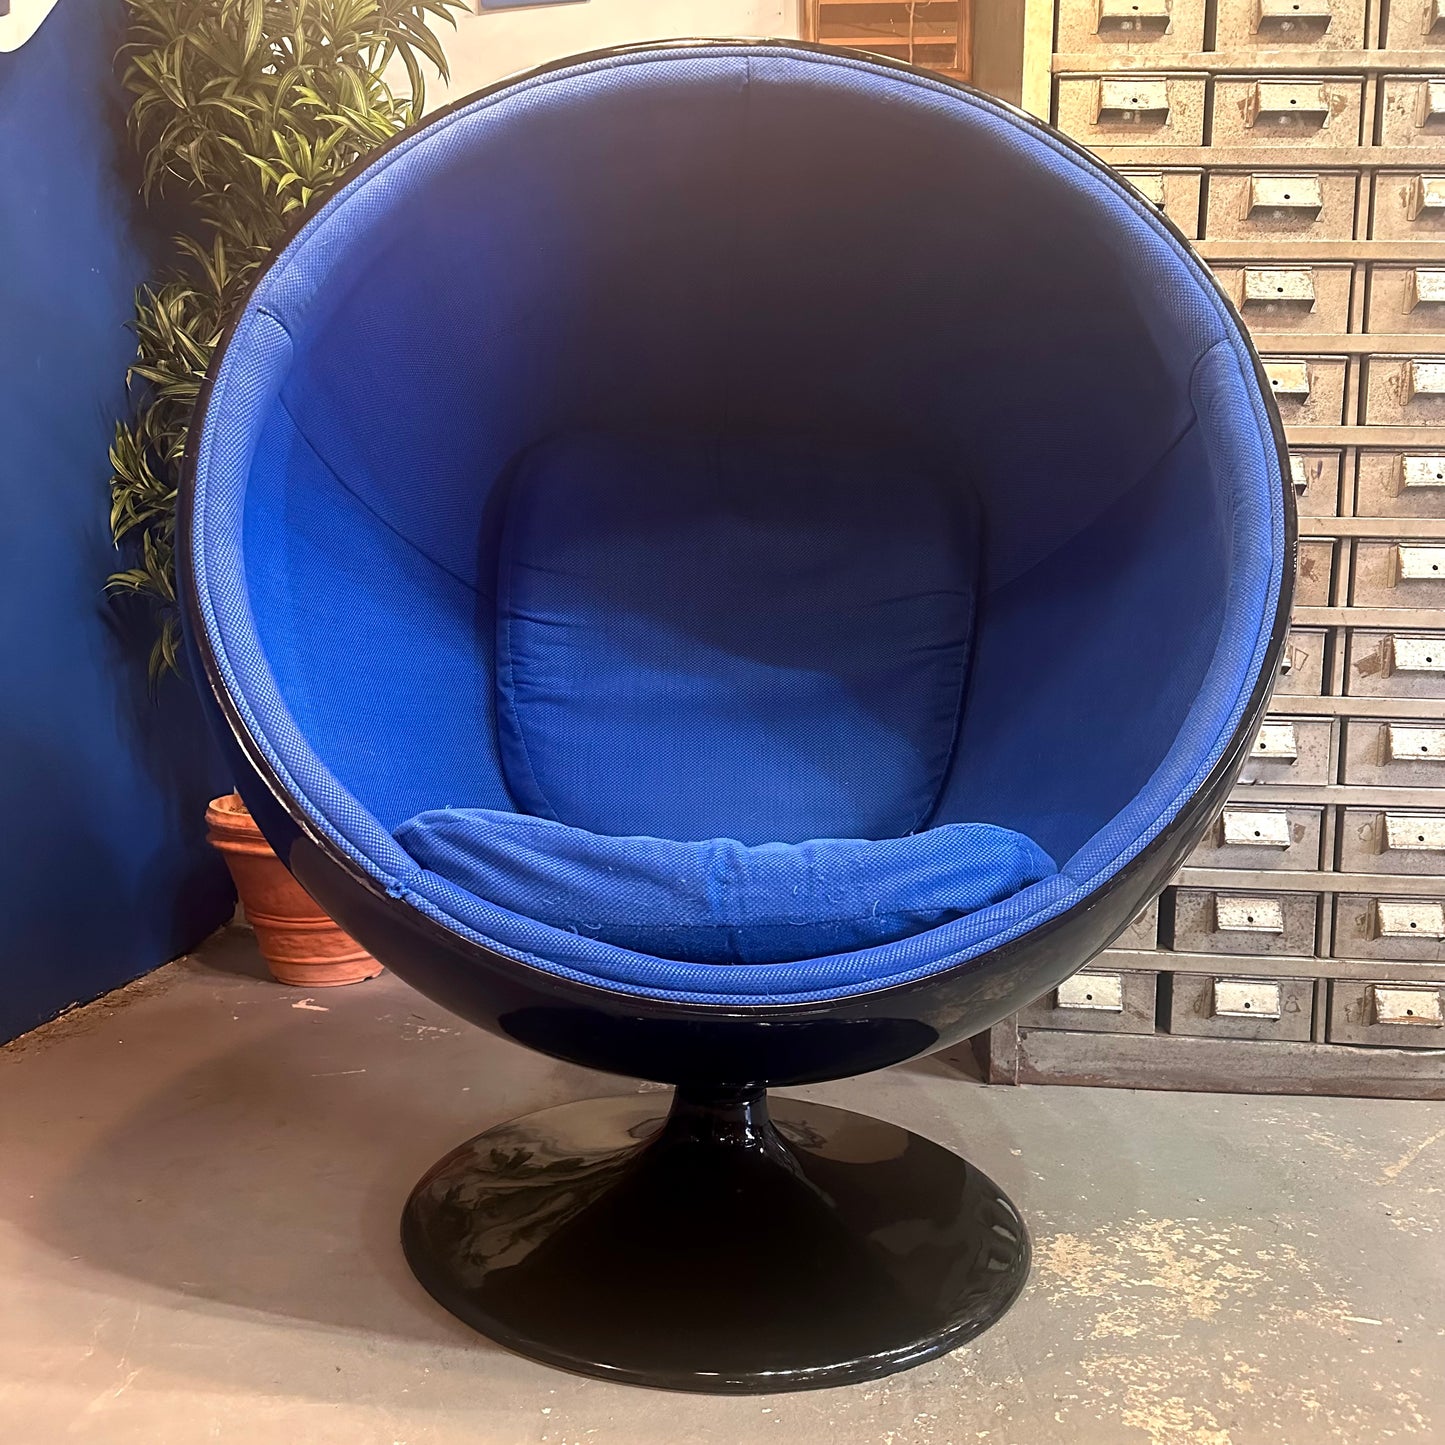 Vintage Rare Black and Blue Ball Chair